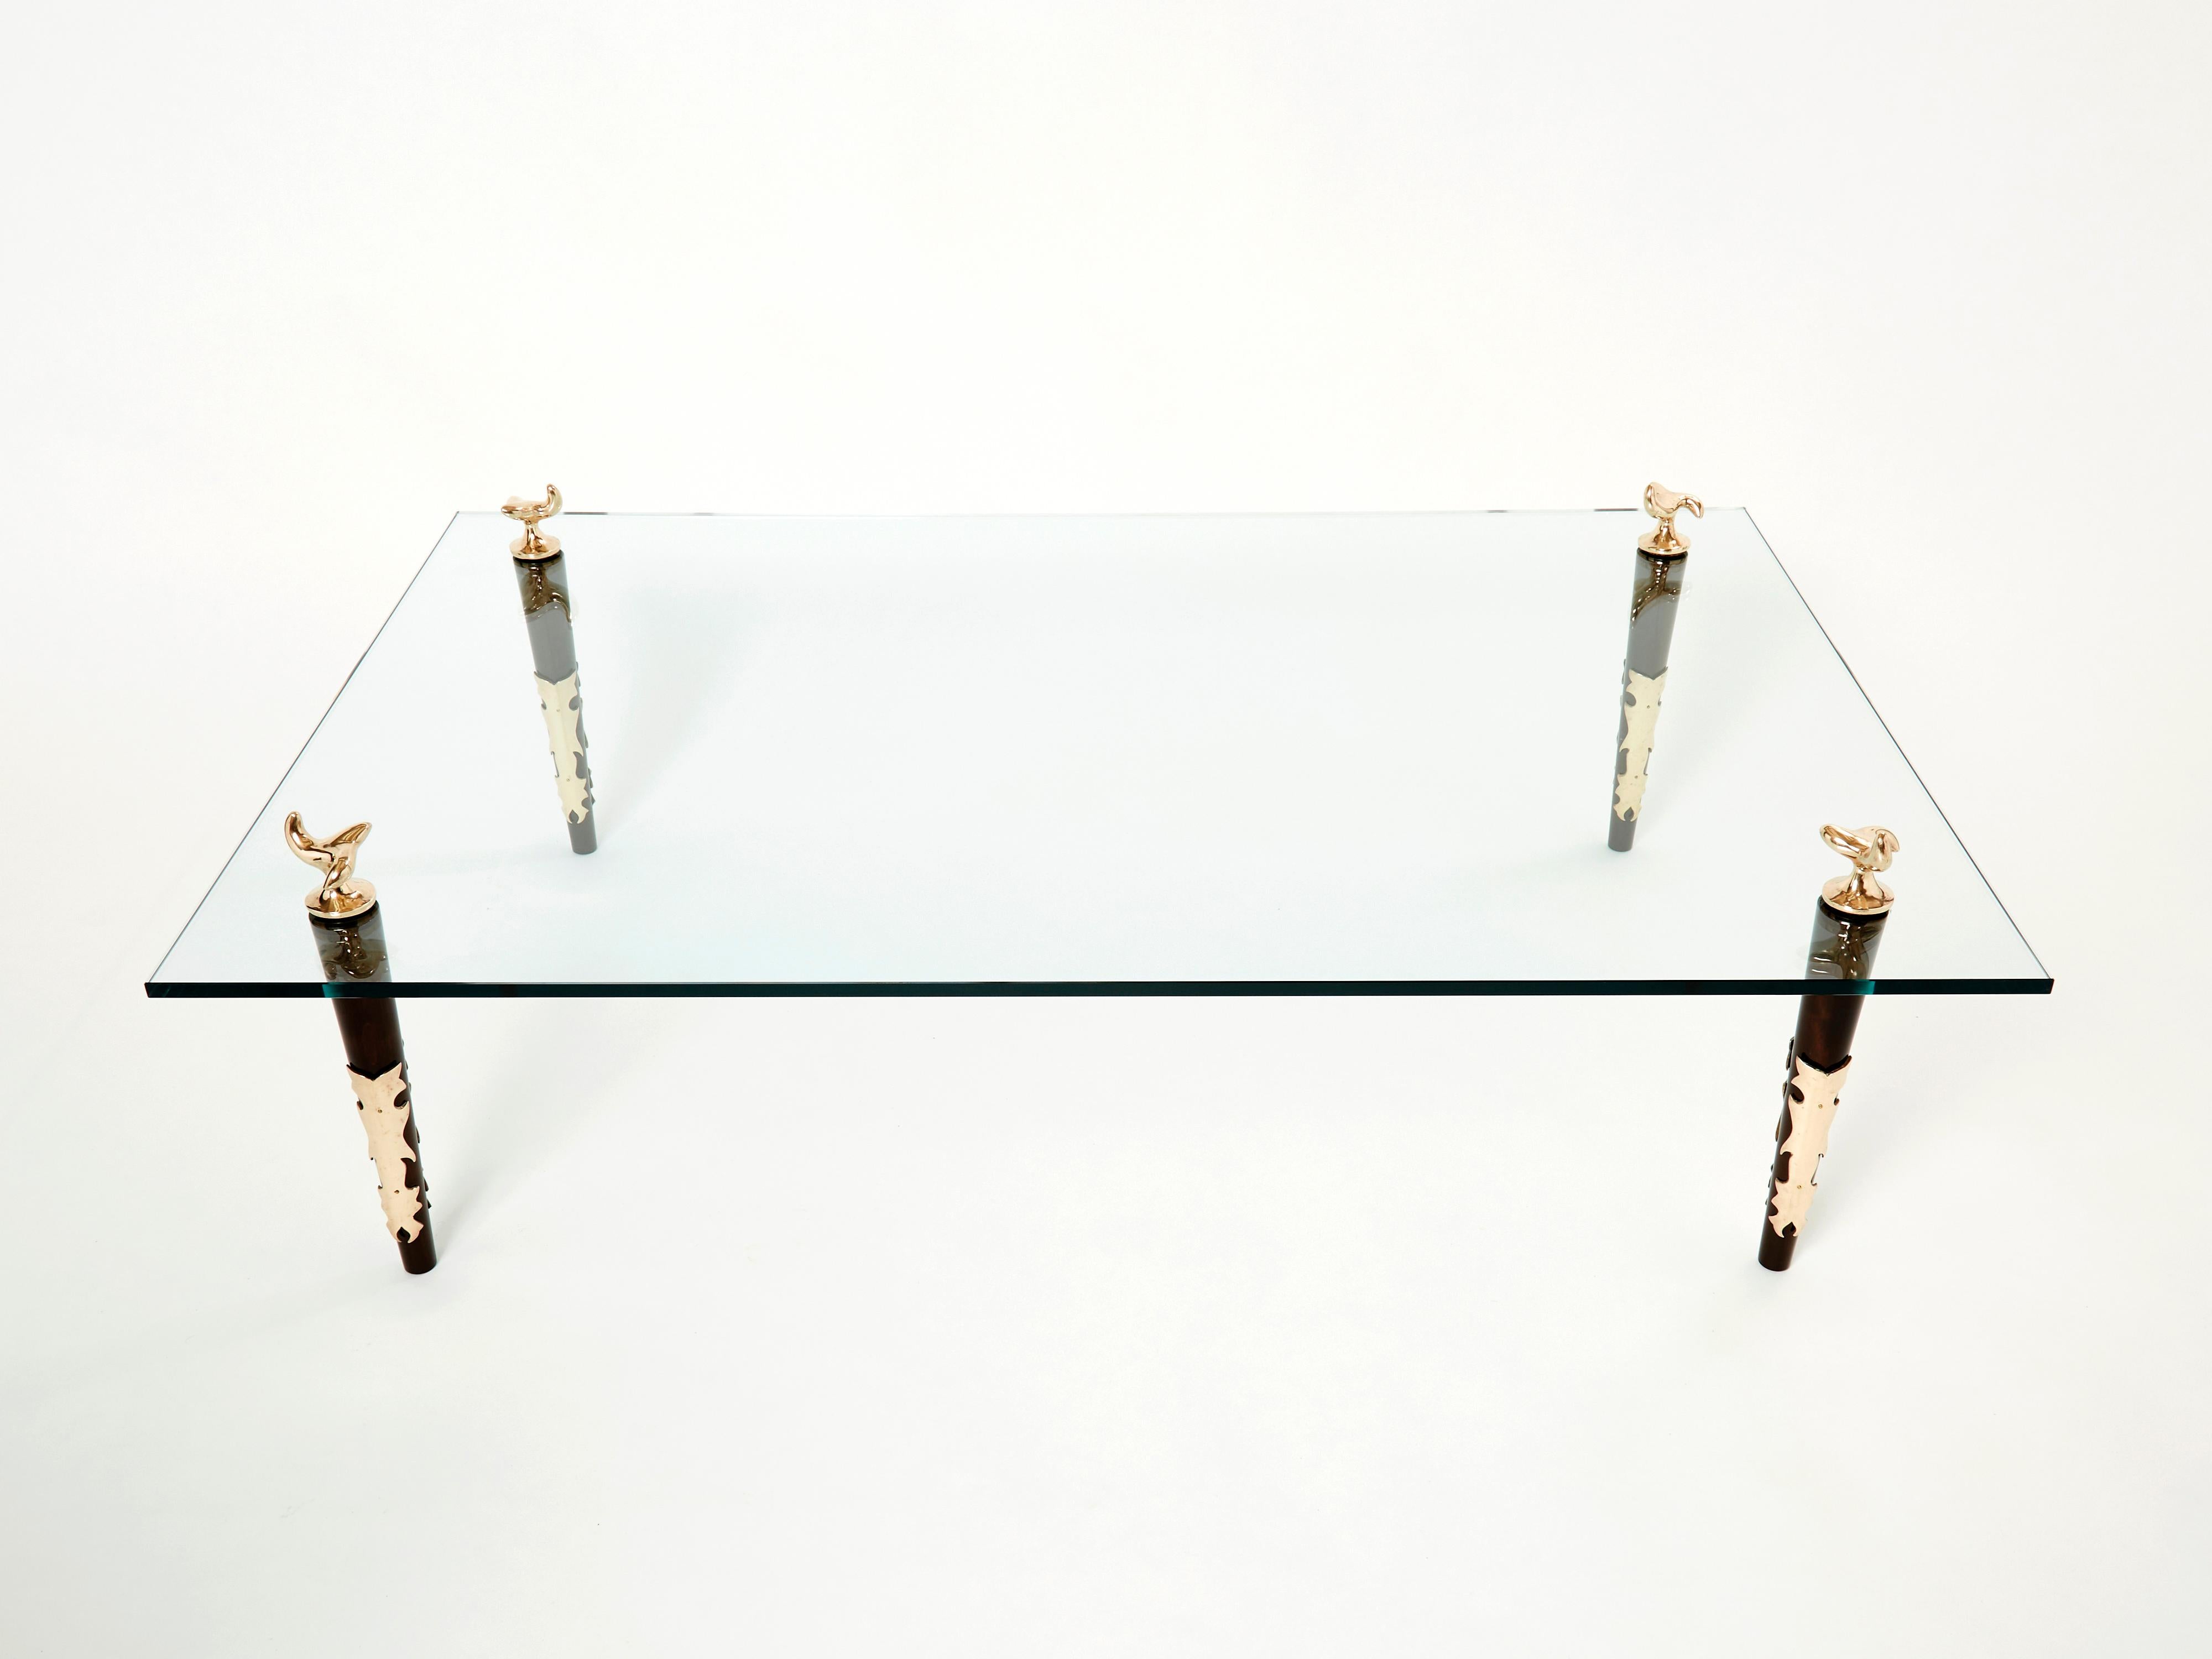 Rare and unique signed coffee table by Elizabeth Garouste & Mattia Bonetti, model “Quatuor”, designed and made in 1995 by the iconic duo. The feet are made in beautiful varnished mahogany decorated with gilt bronze elements. This is clearly a